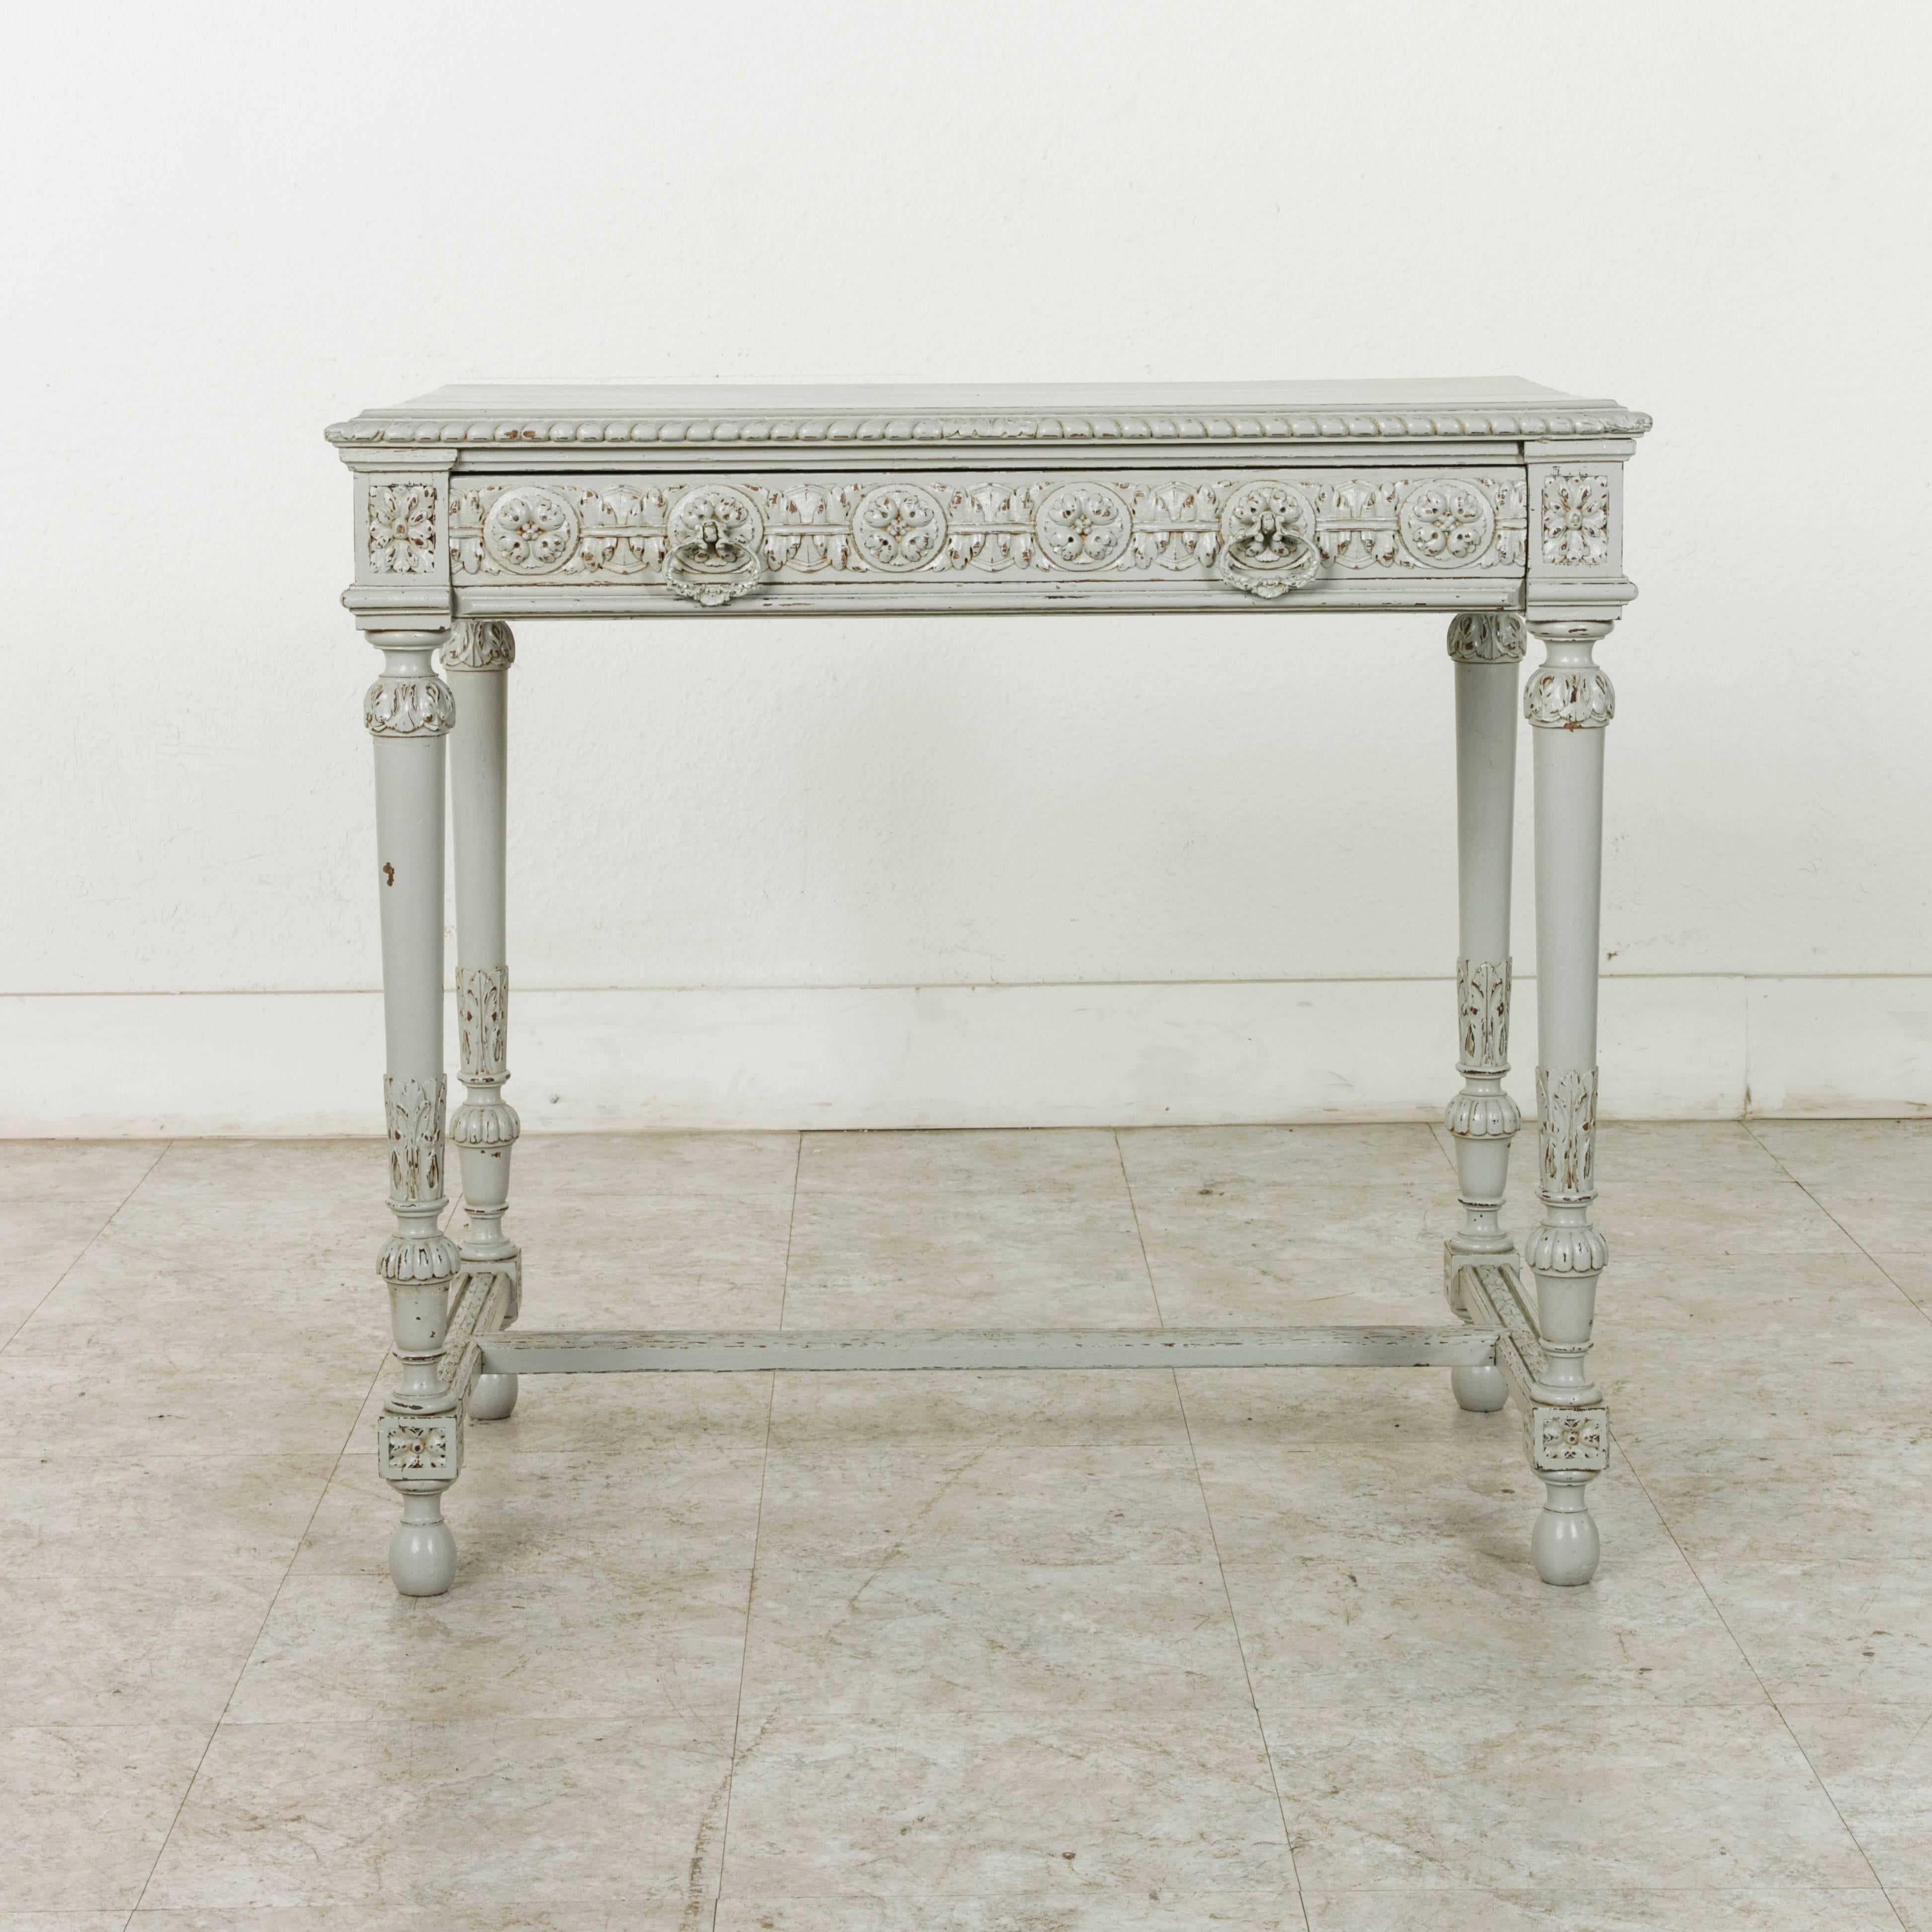 This late 19th century writing desk features intricate hand-carved Louis XVI motifs of rosettes and acanthus leaves and is finished on all sides. Painted in a classic Marie Antoinette grey, this desk has a single drawer fitted with two drawer pulls.